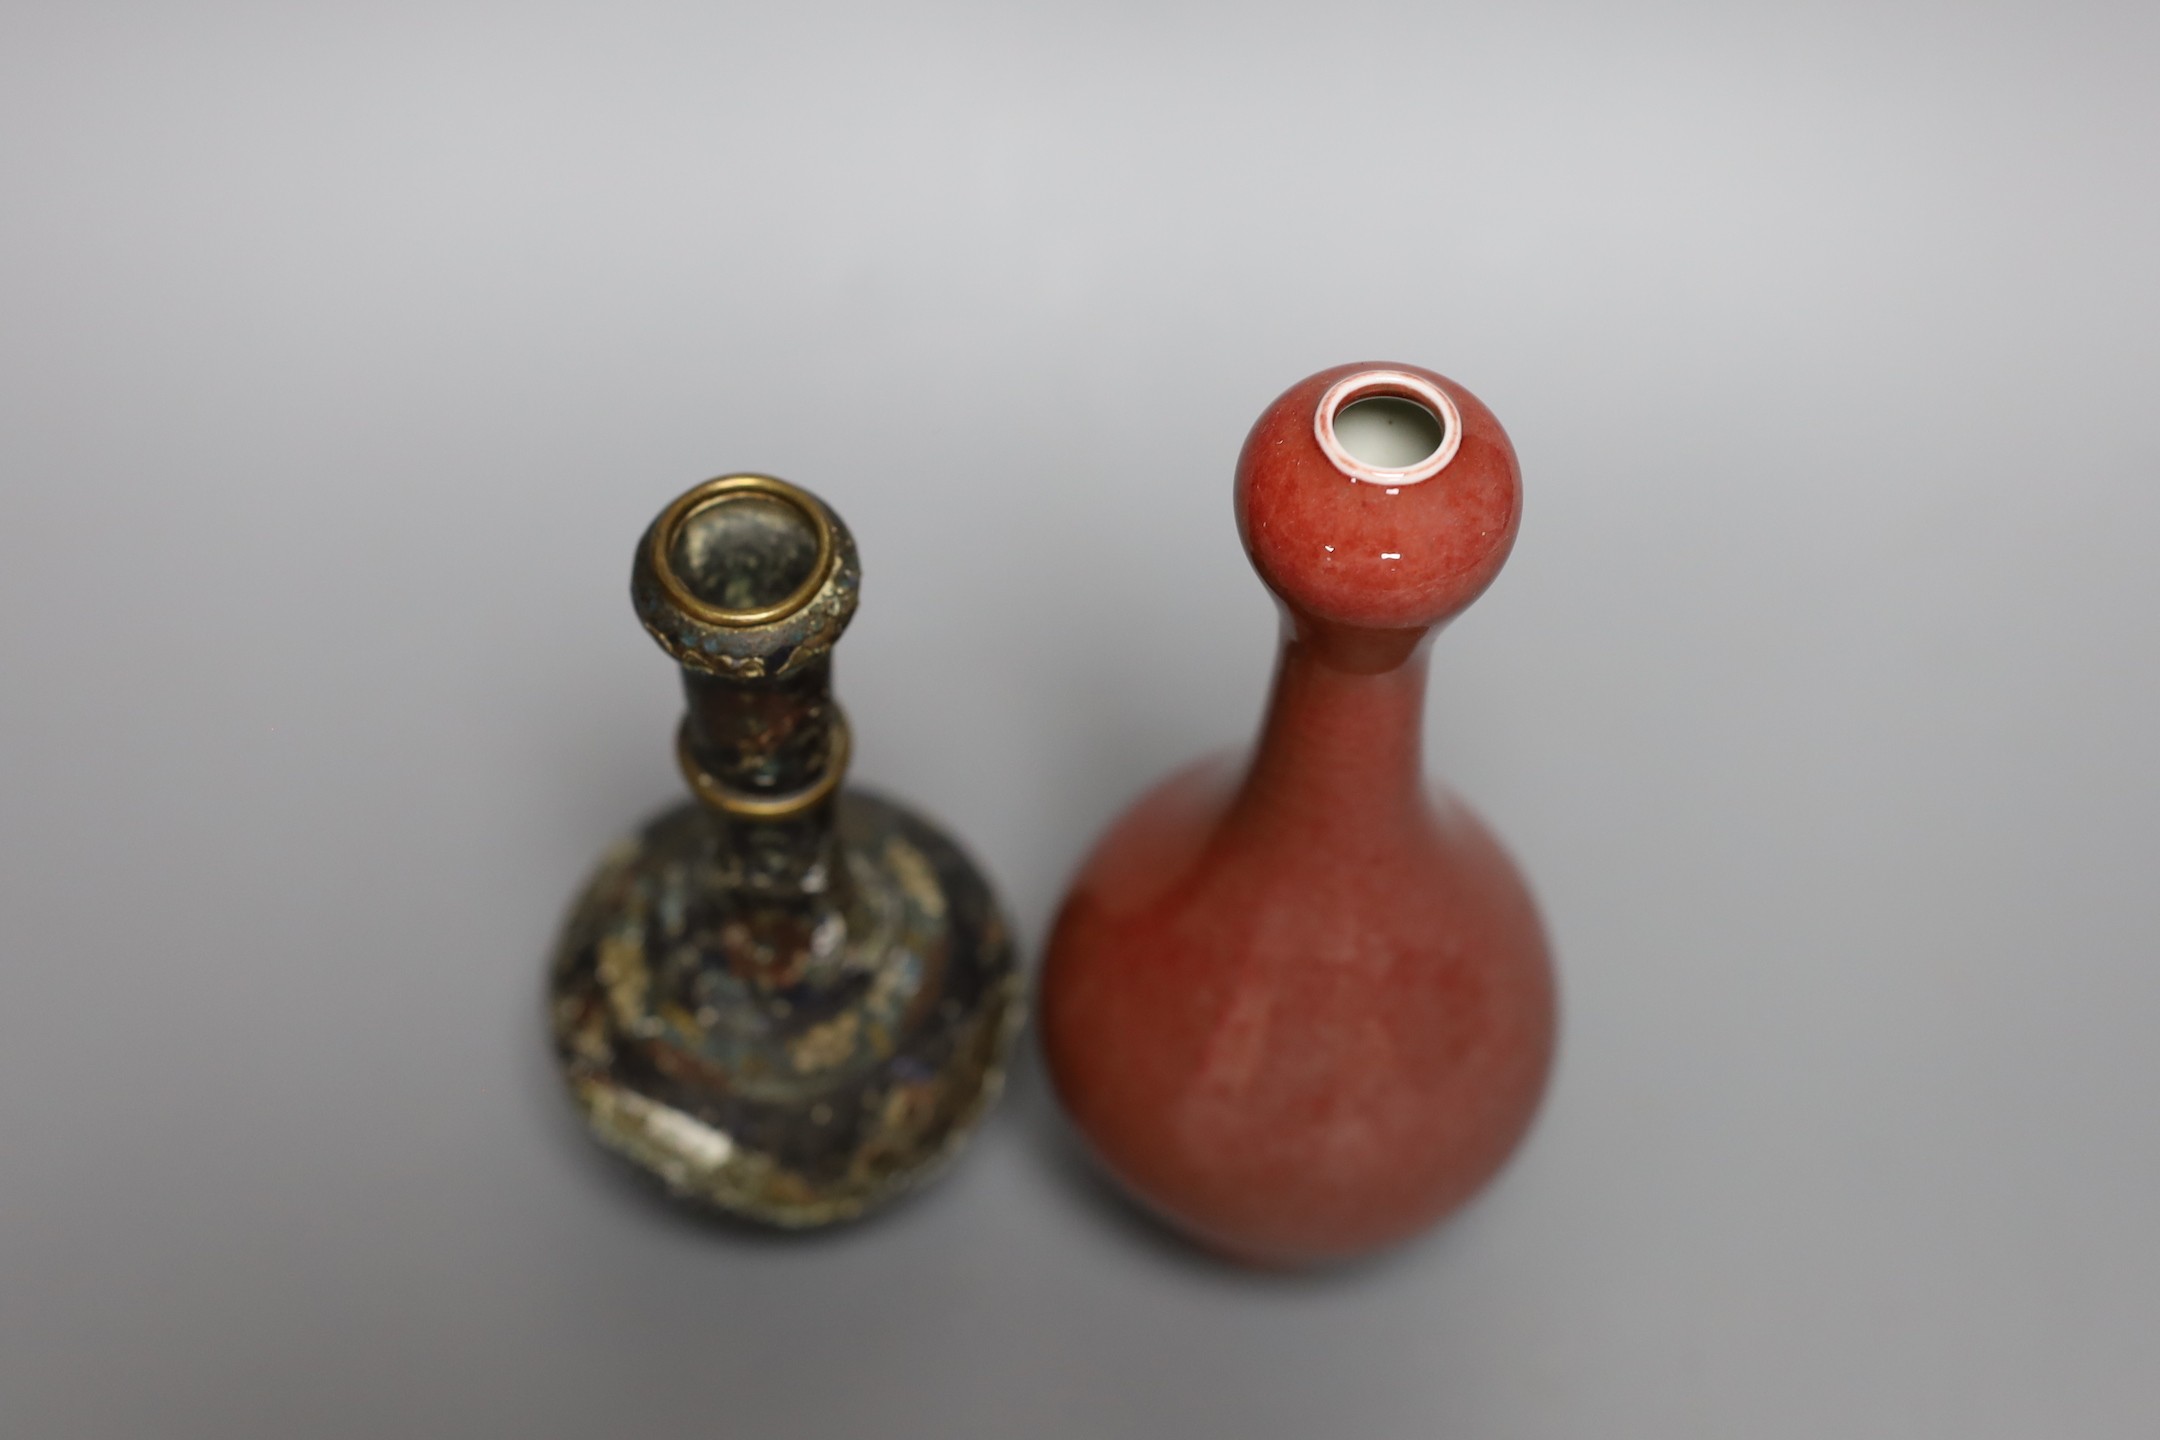 A Chinese Ming cloisonne vase and a red gourd vase, tallest 18cm tall